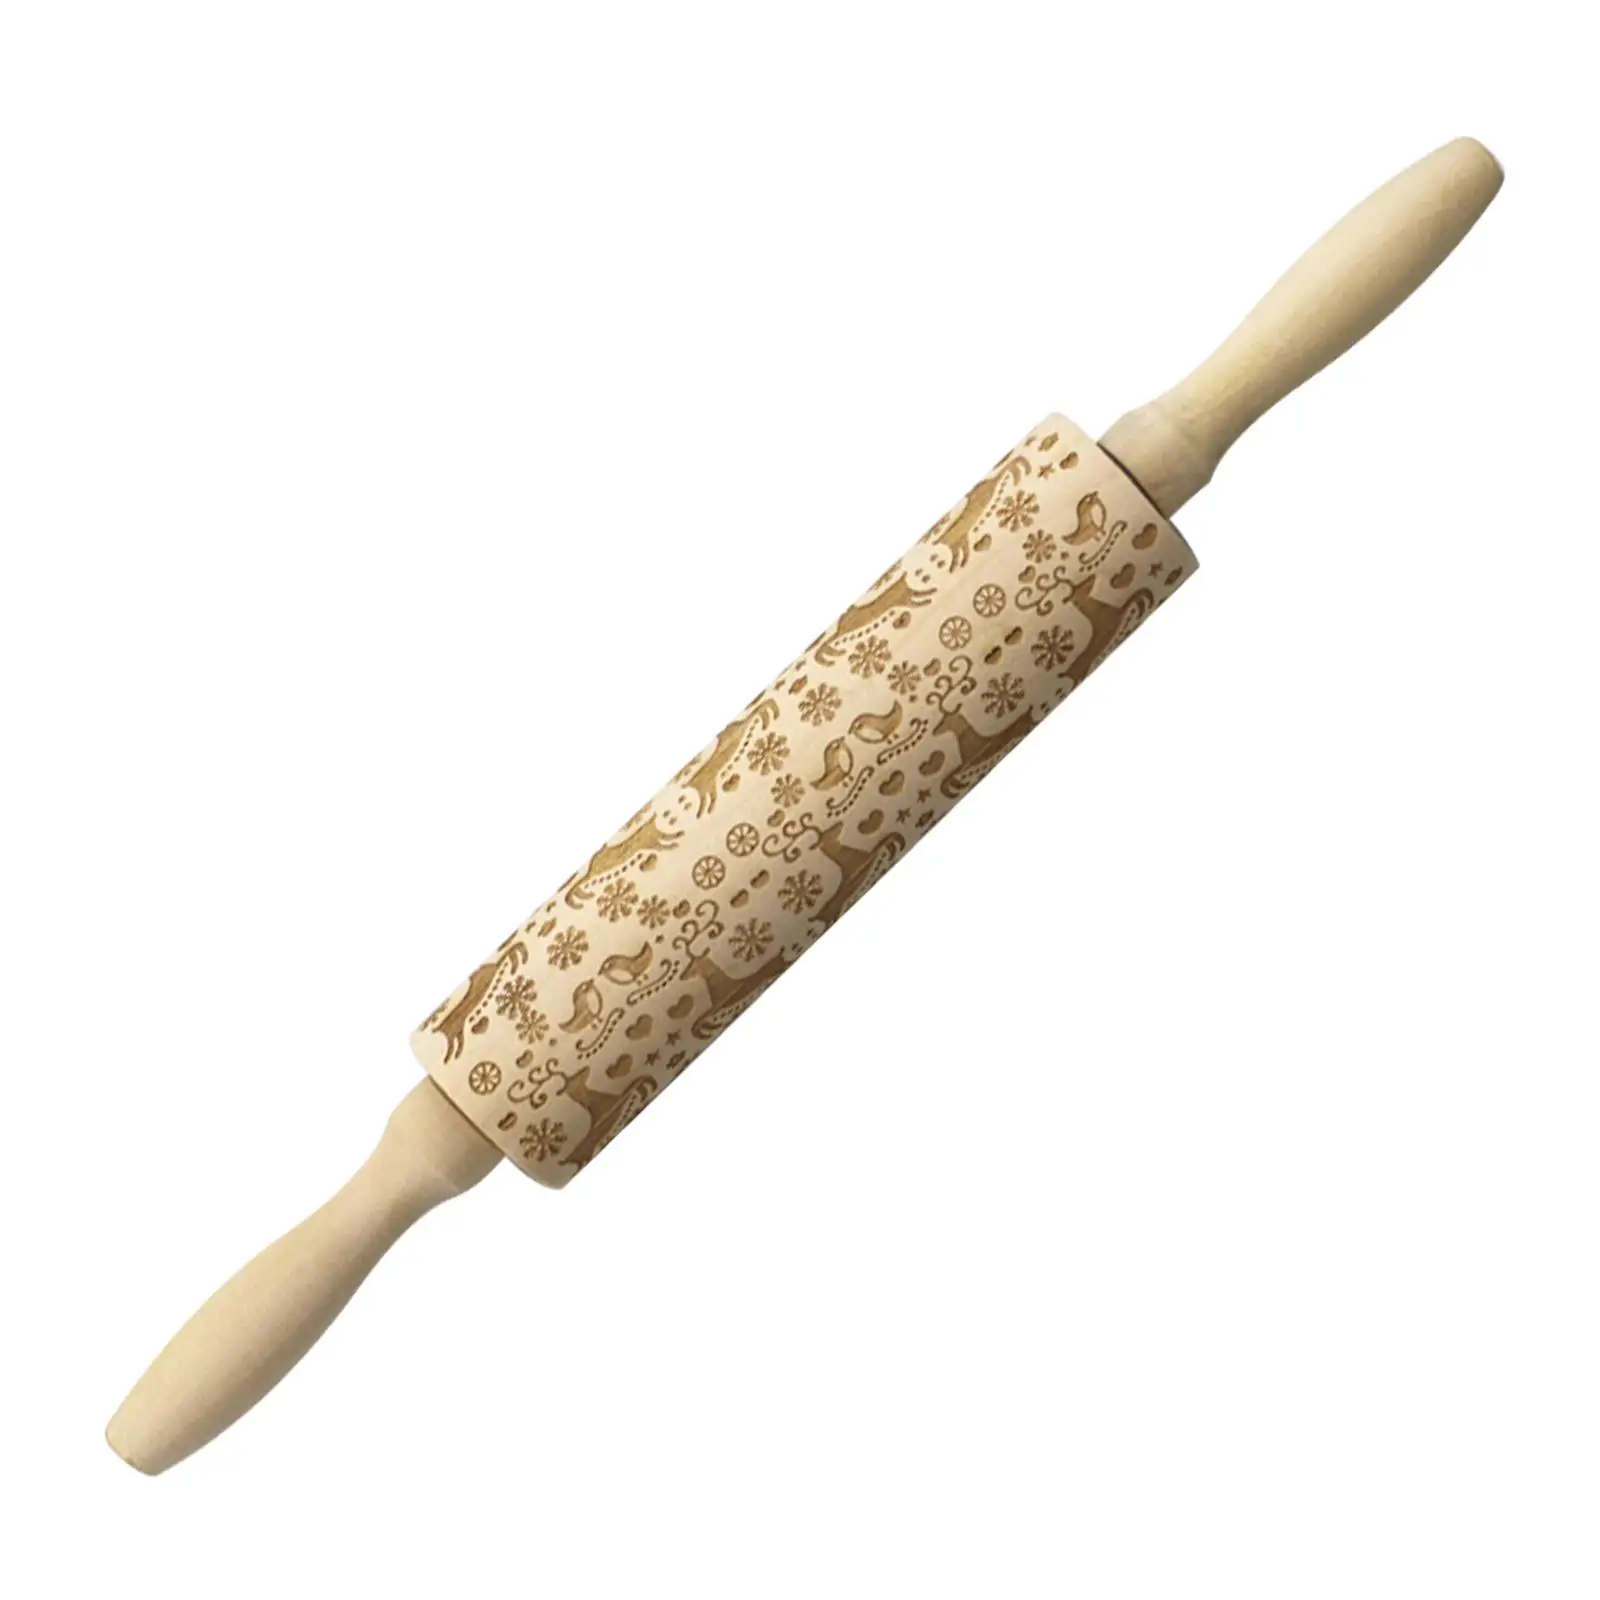 Christmas Rolling Pin 3D Holiday Rolling Pin Wood Wooden Rolling Pin with Patterns for Baking to Decorate Pizza Bread Pies Dough